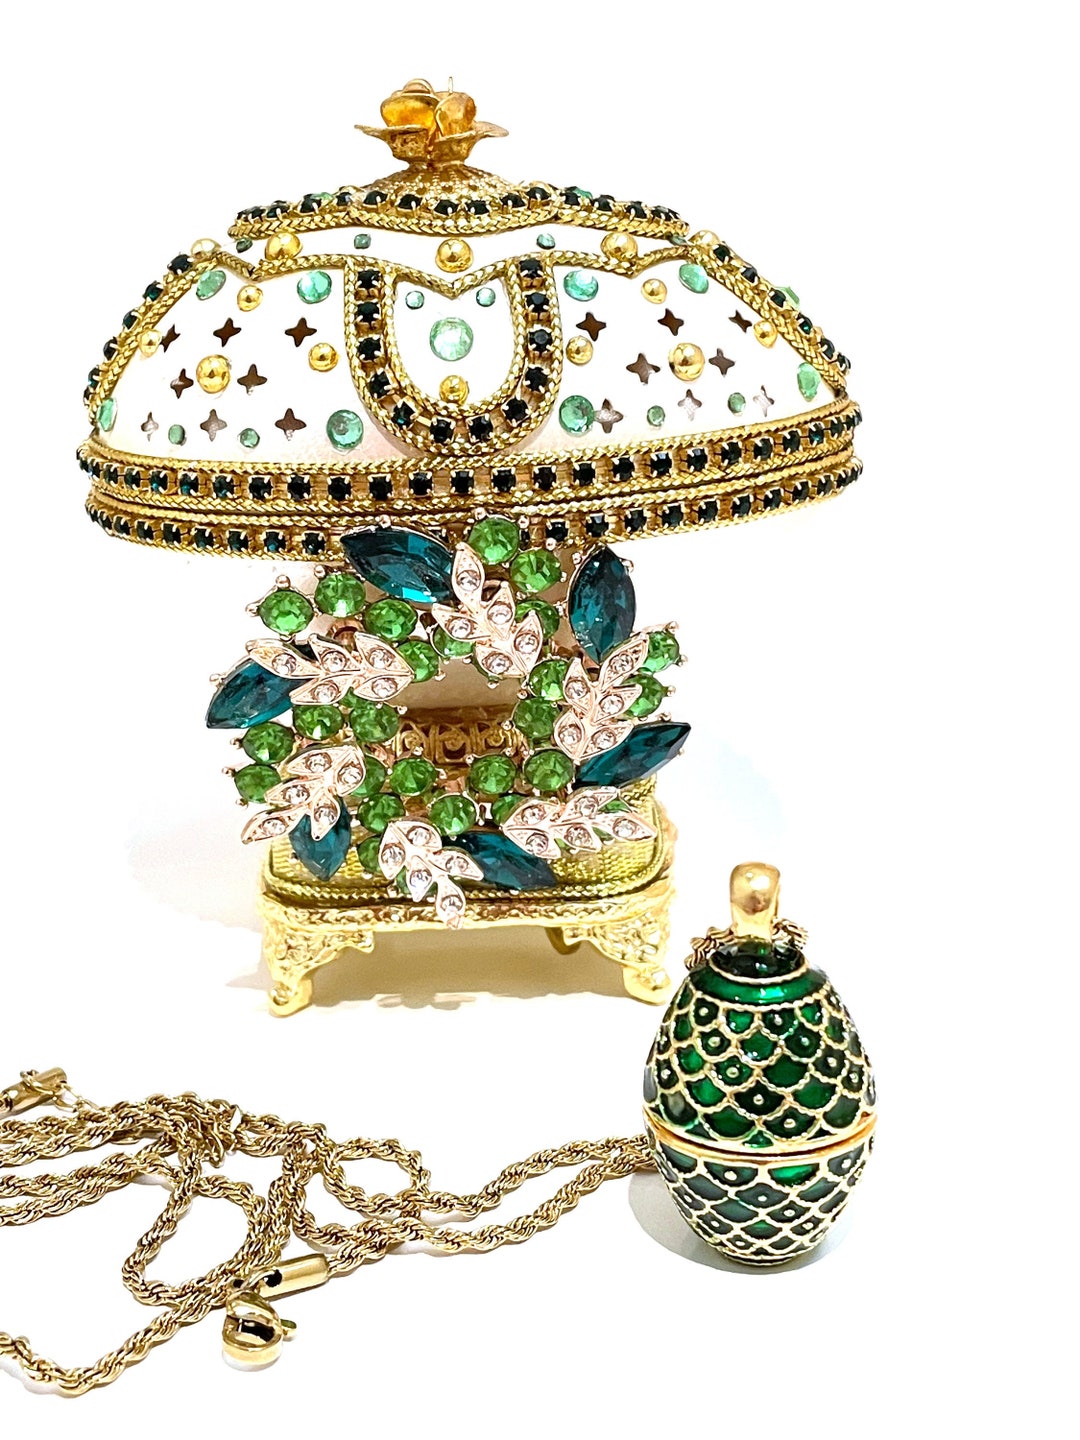 ONE OF A KIND Antique Faberge Egg Style Fabergé Etsy